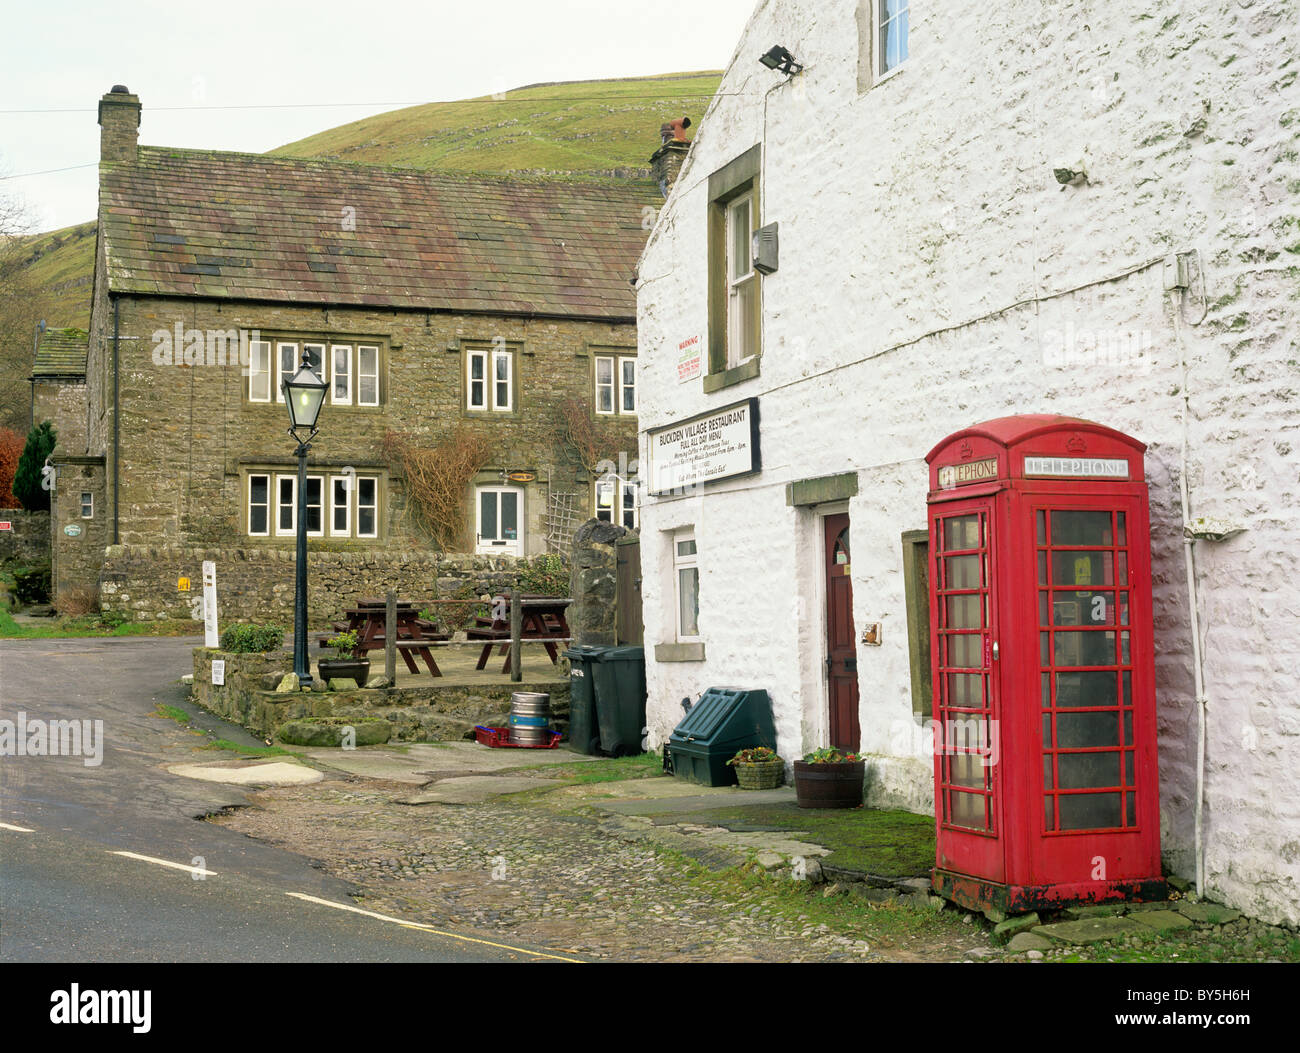 Buckden village with red telephone box, Wharfedale, Yorkshire Dales, U.K. Stock Photo